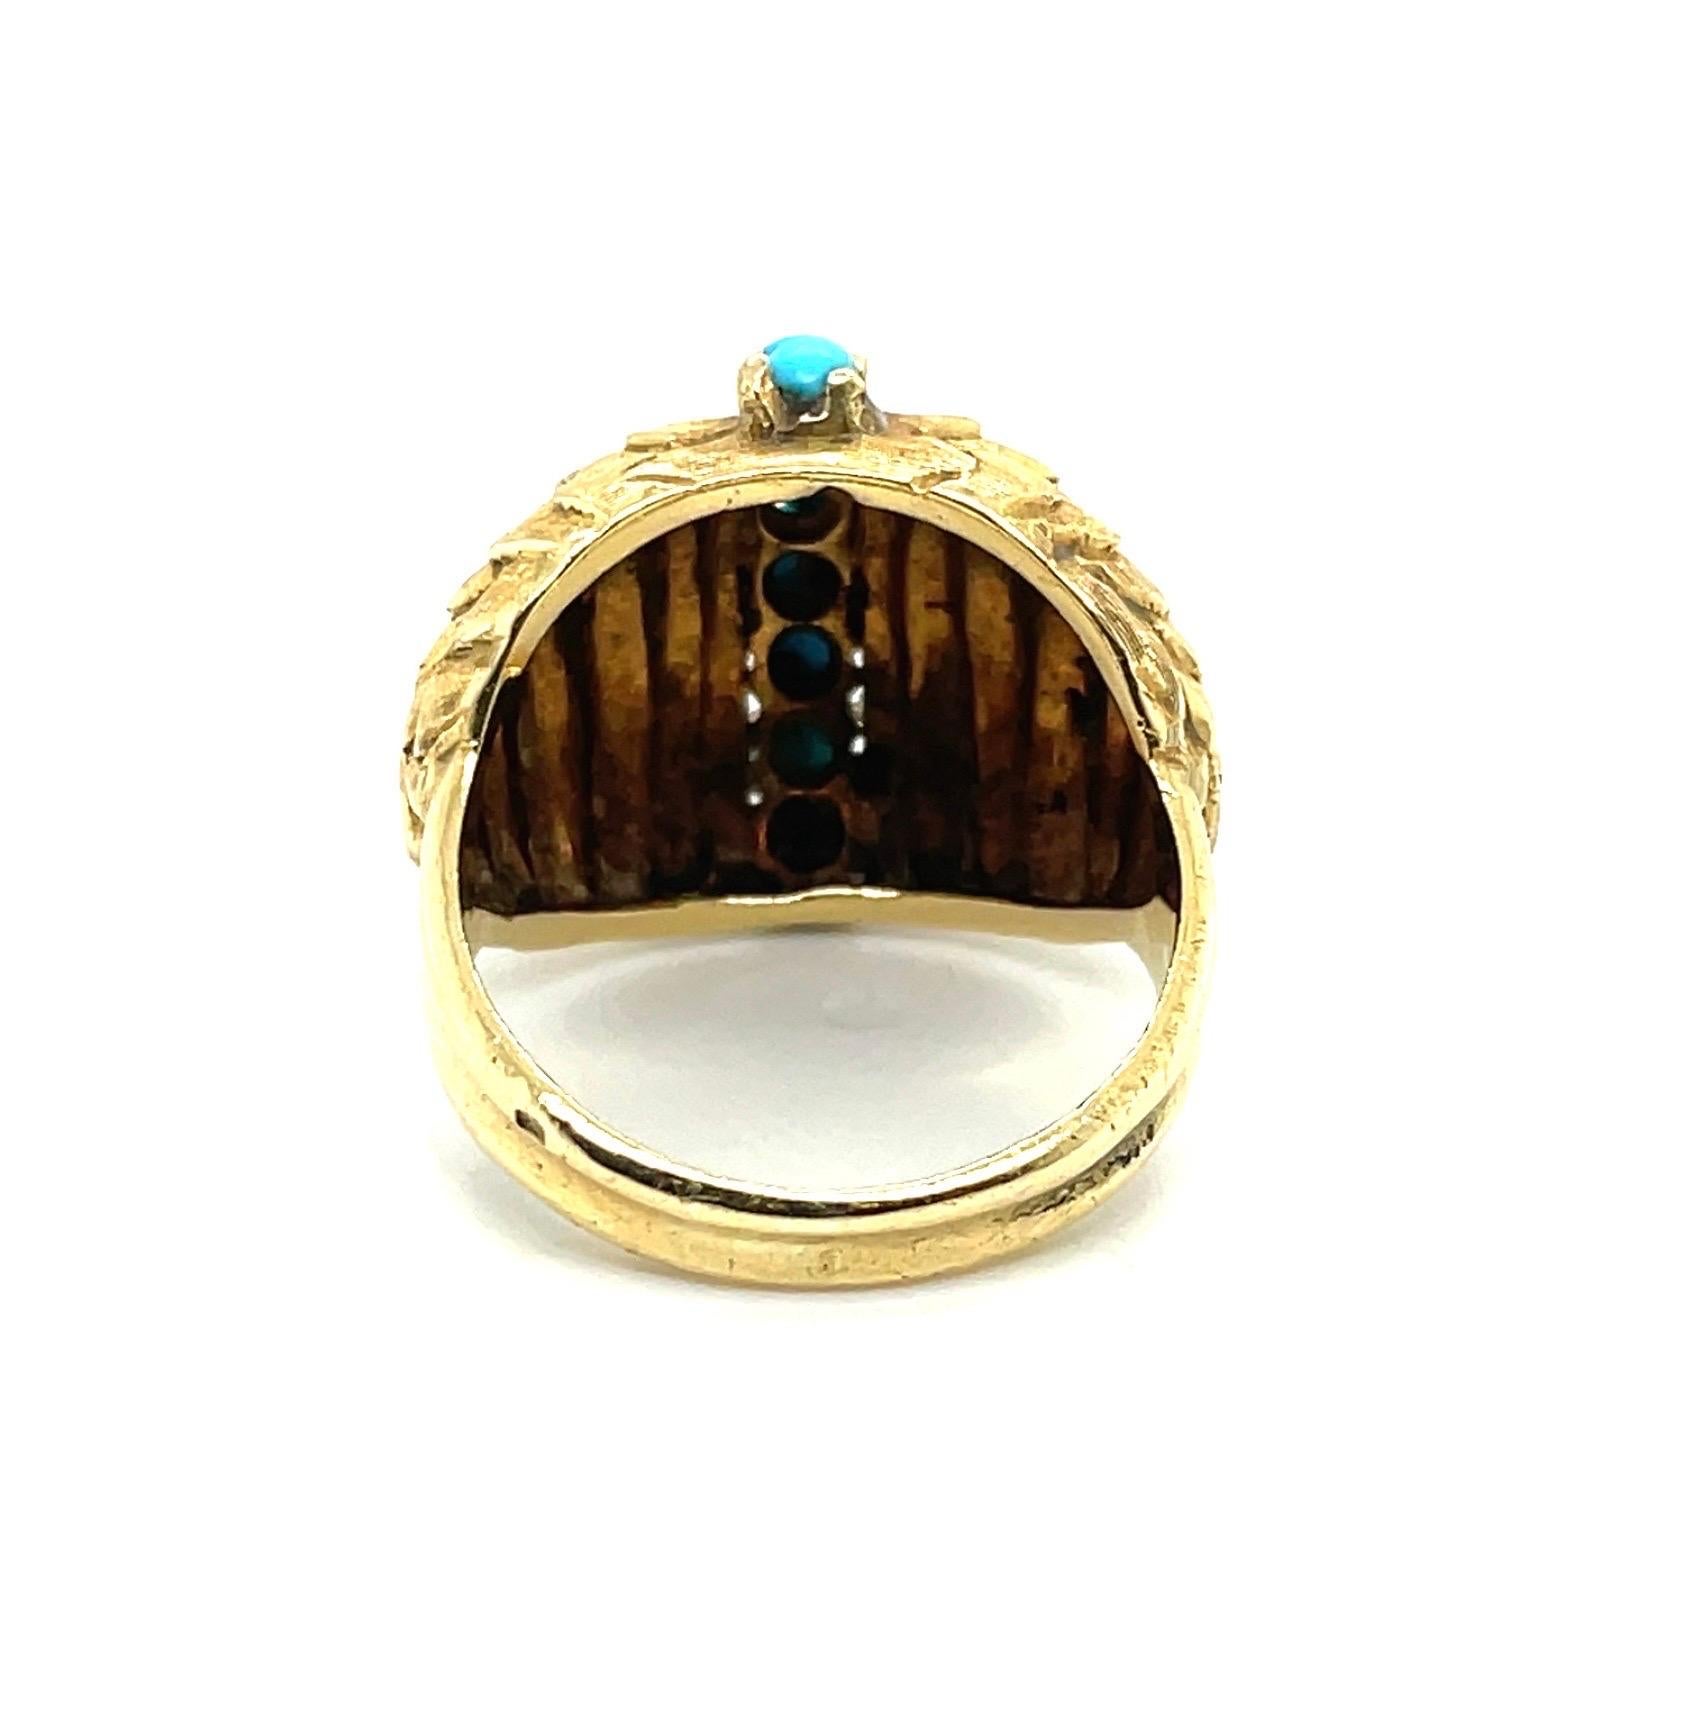 Post-War 18 Karat Yellow Gold and Turquoise Cocktail Ring circa 1950s For Sale